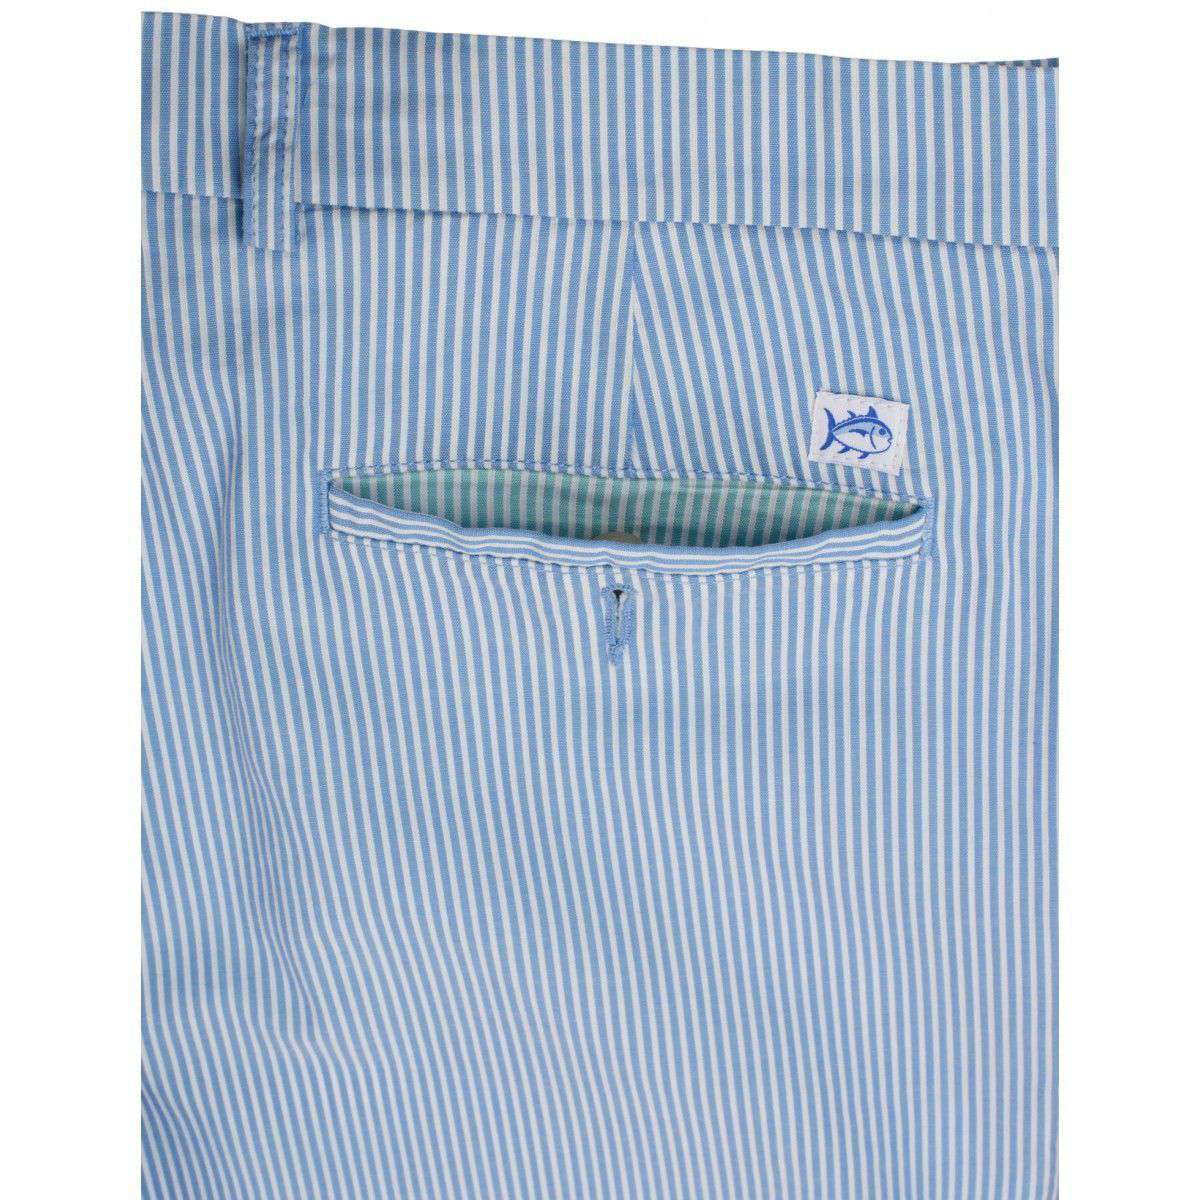 Double-Sided Seersucker Shorts in Ocean Channel Blue by Southern Tide - Country Club Prep